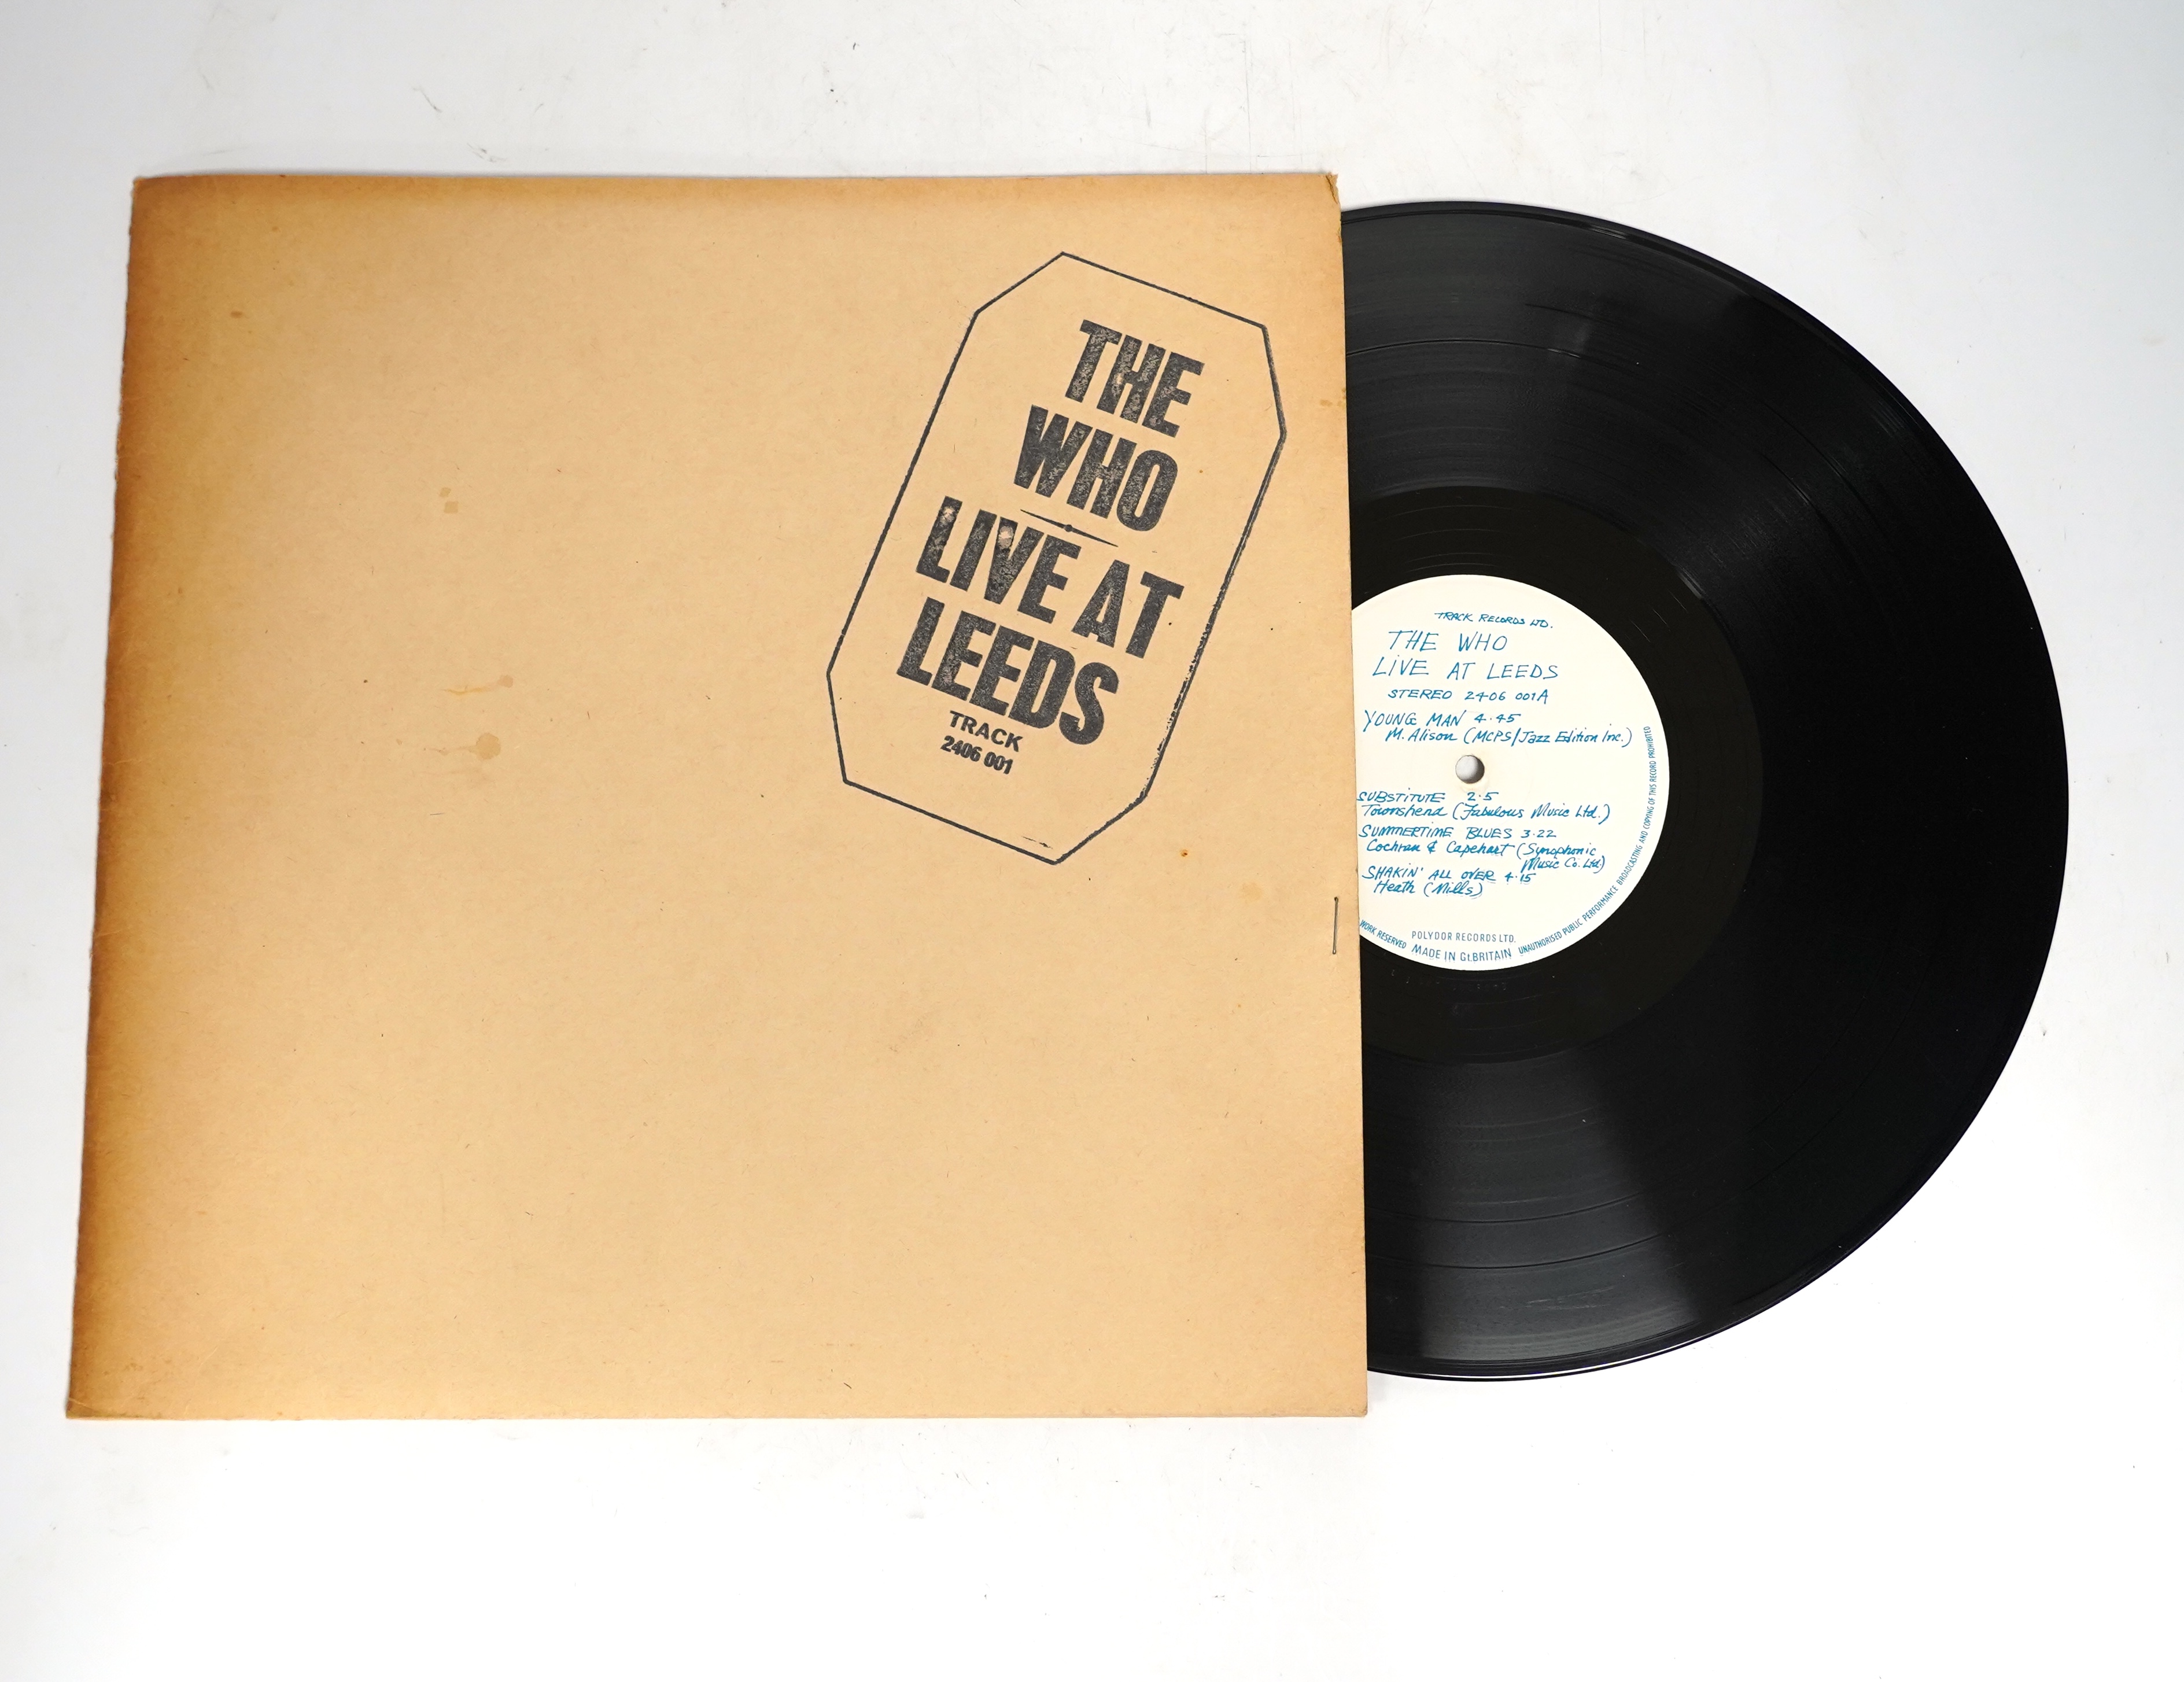 The Who; Live at Leeds LP record album on Track label 2406 001A, with black print to cover, eleven inserts present (poster missing)